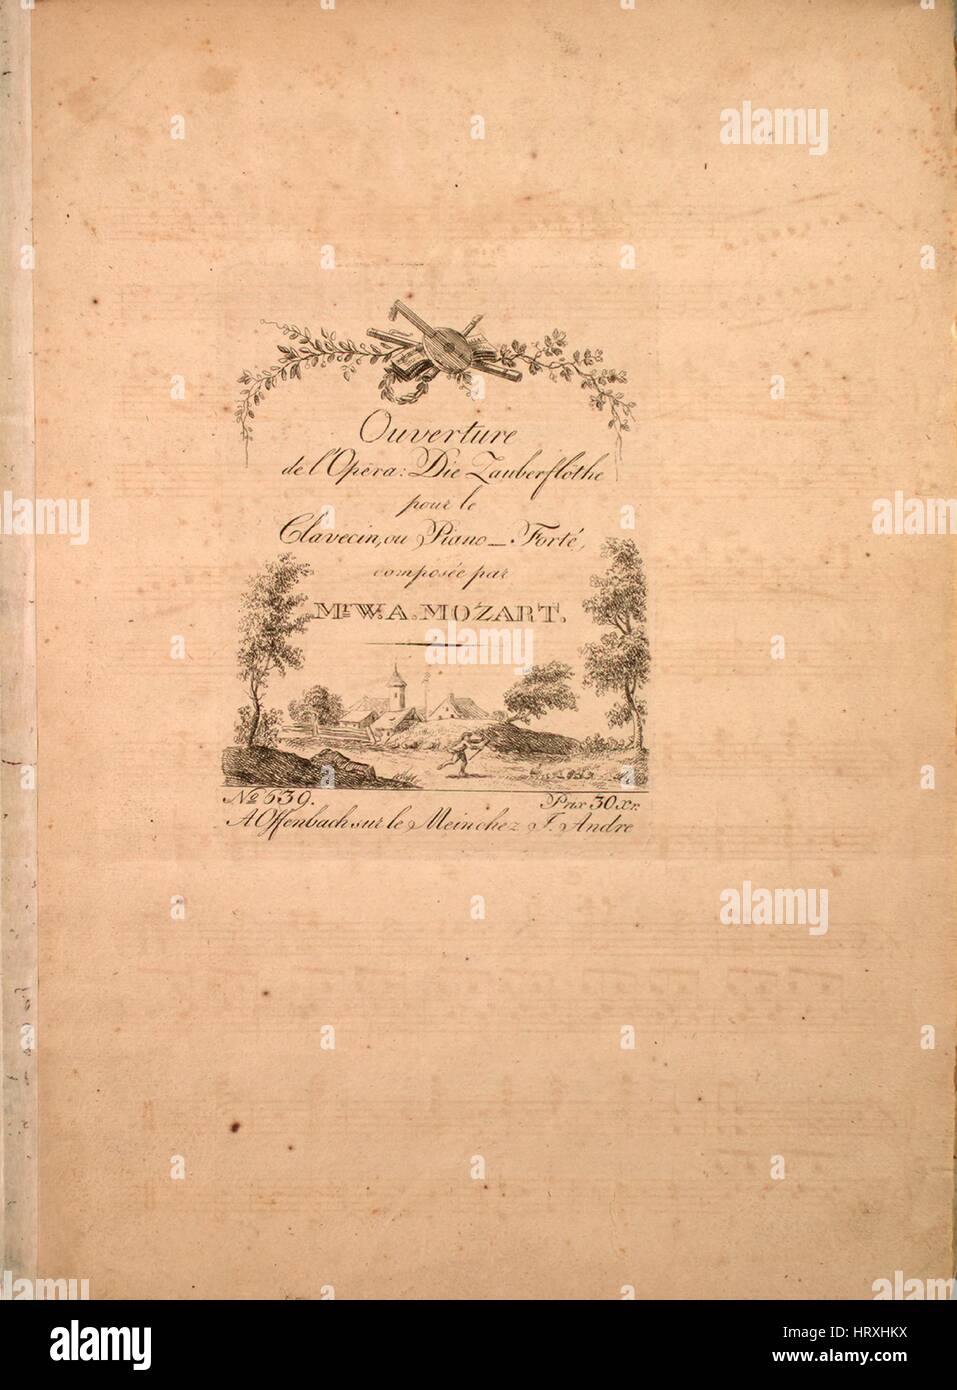 Sheet music cover image of the song 'Ouverture de l'Opera  Die Zauberflothe pour le Clavecin, our Piano Forte', with original authorship notes reading 'composee par Mr WA Mozart', 1900. The publisher is listed as 'A. Offenbach sur le Meinchez J. Andre', the form of composition is 'sectional', the instrumentation is 'piano, harpsichord, clavichord', the first line reads 'None', and the illustration artist is listed as 'None'. Stock Photo